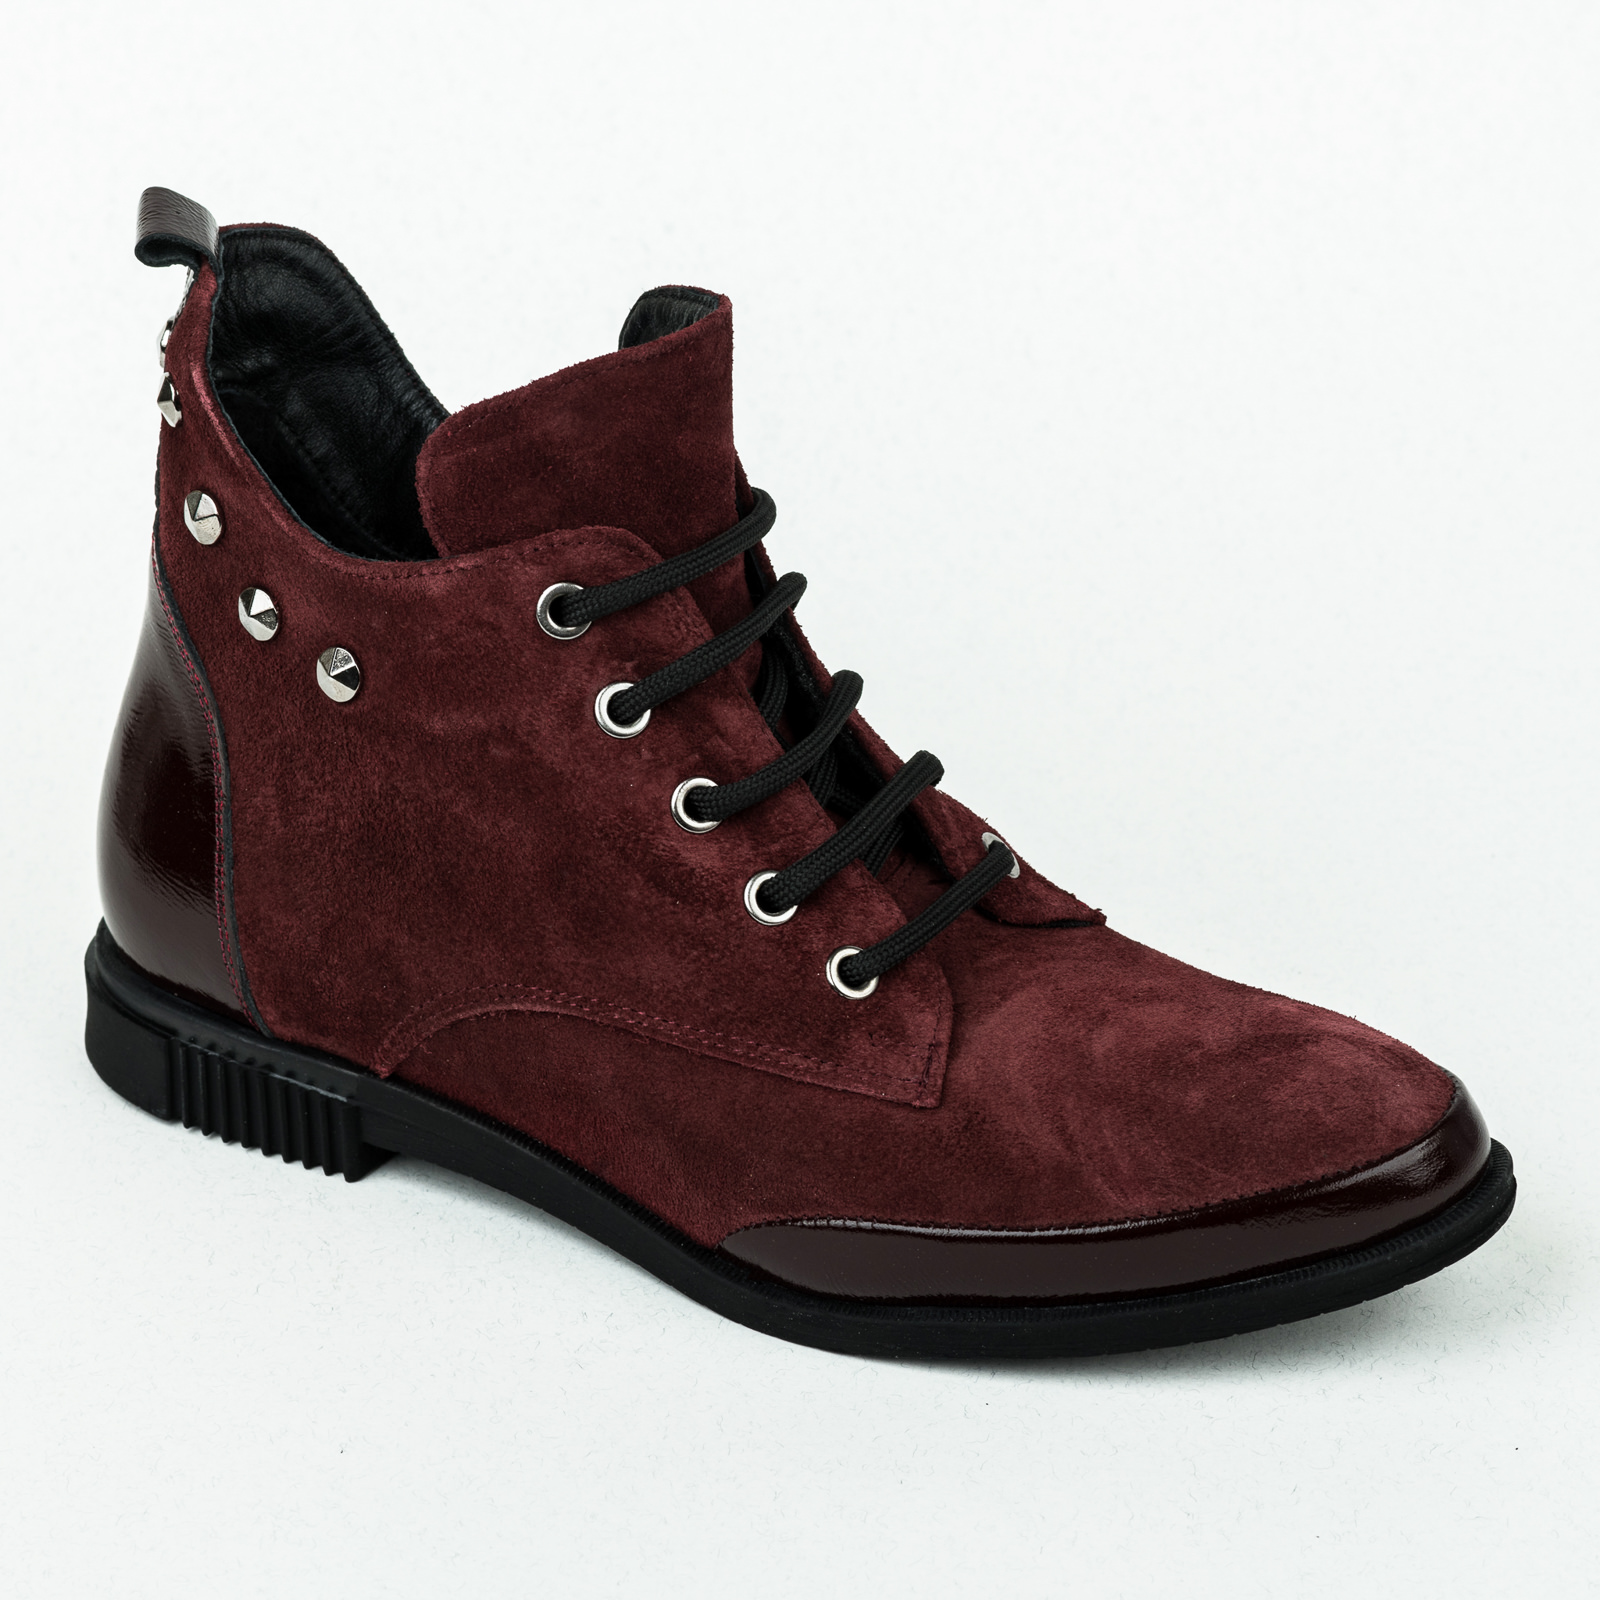 Leather ankle boots B038 - WINE RED